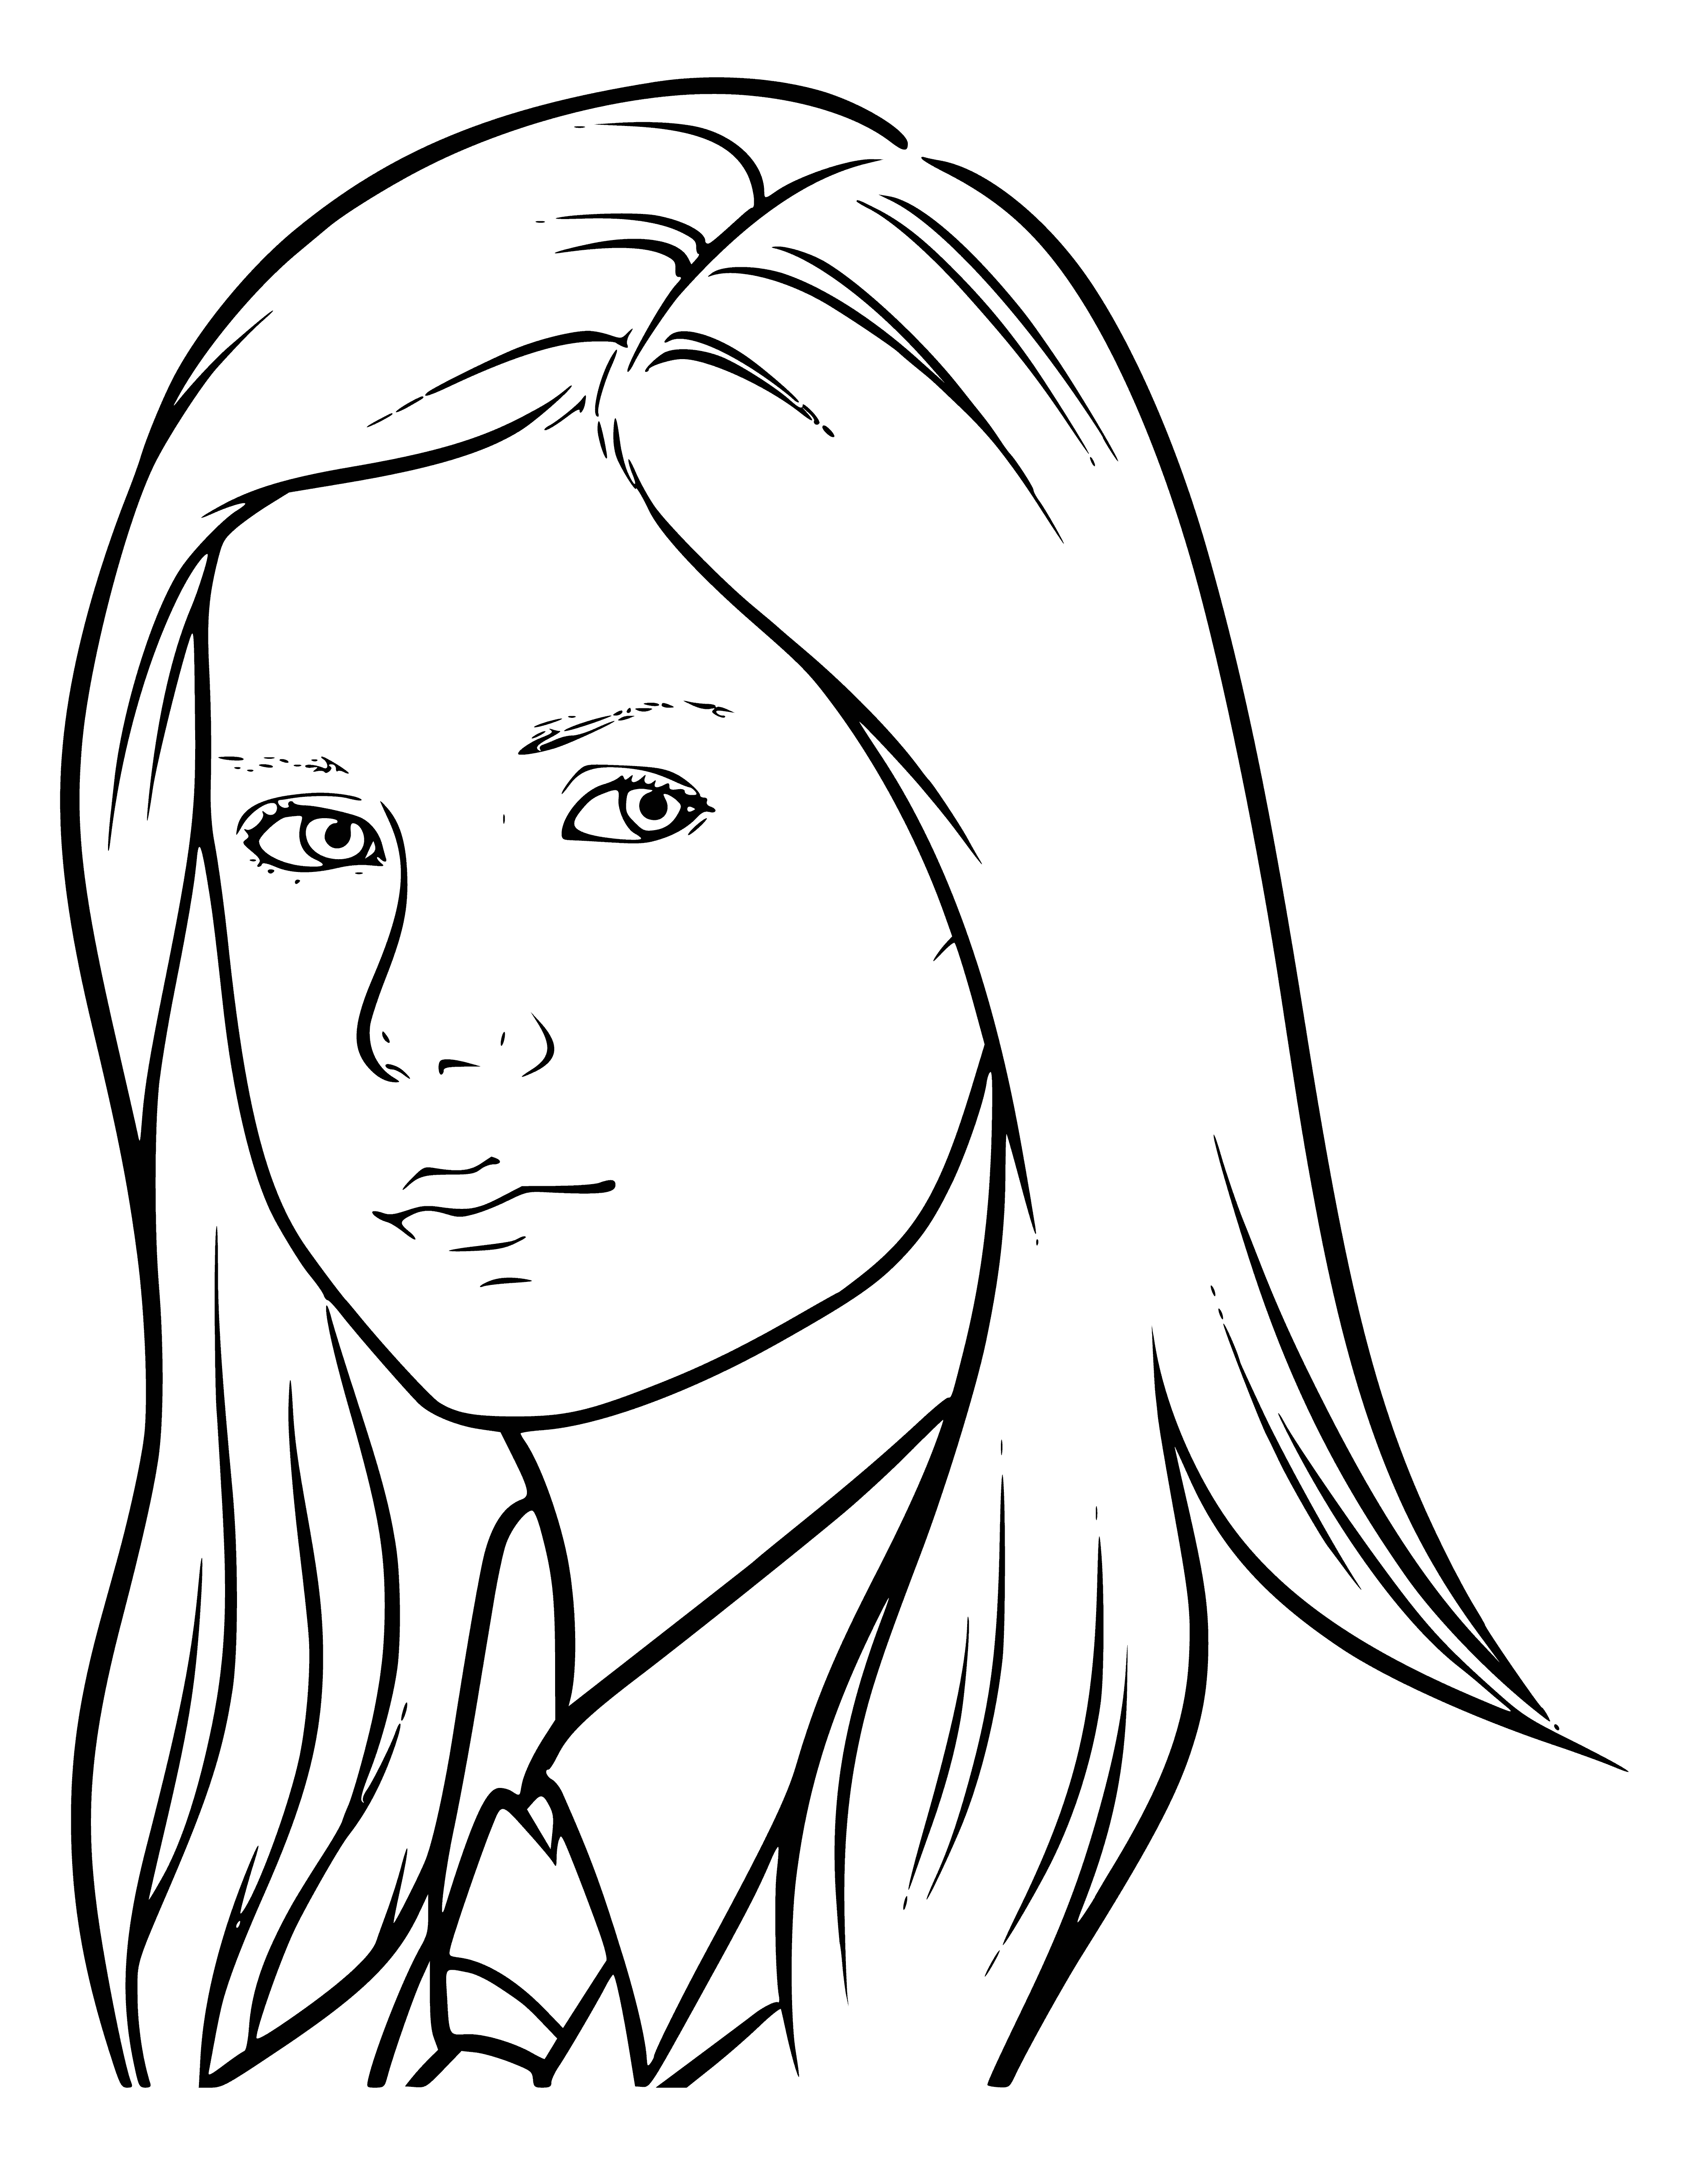 coloring page: Girl with long, red hair, bright green eyes & red shirt; looks to be around 13 years old.